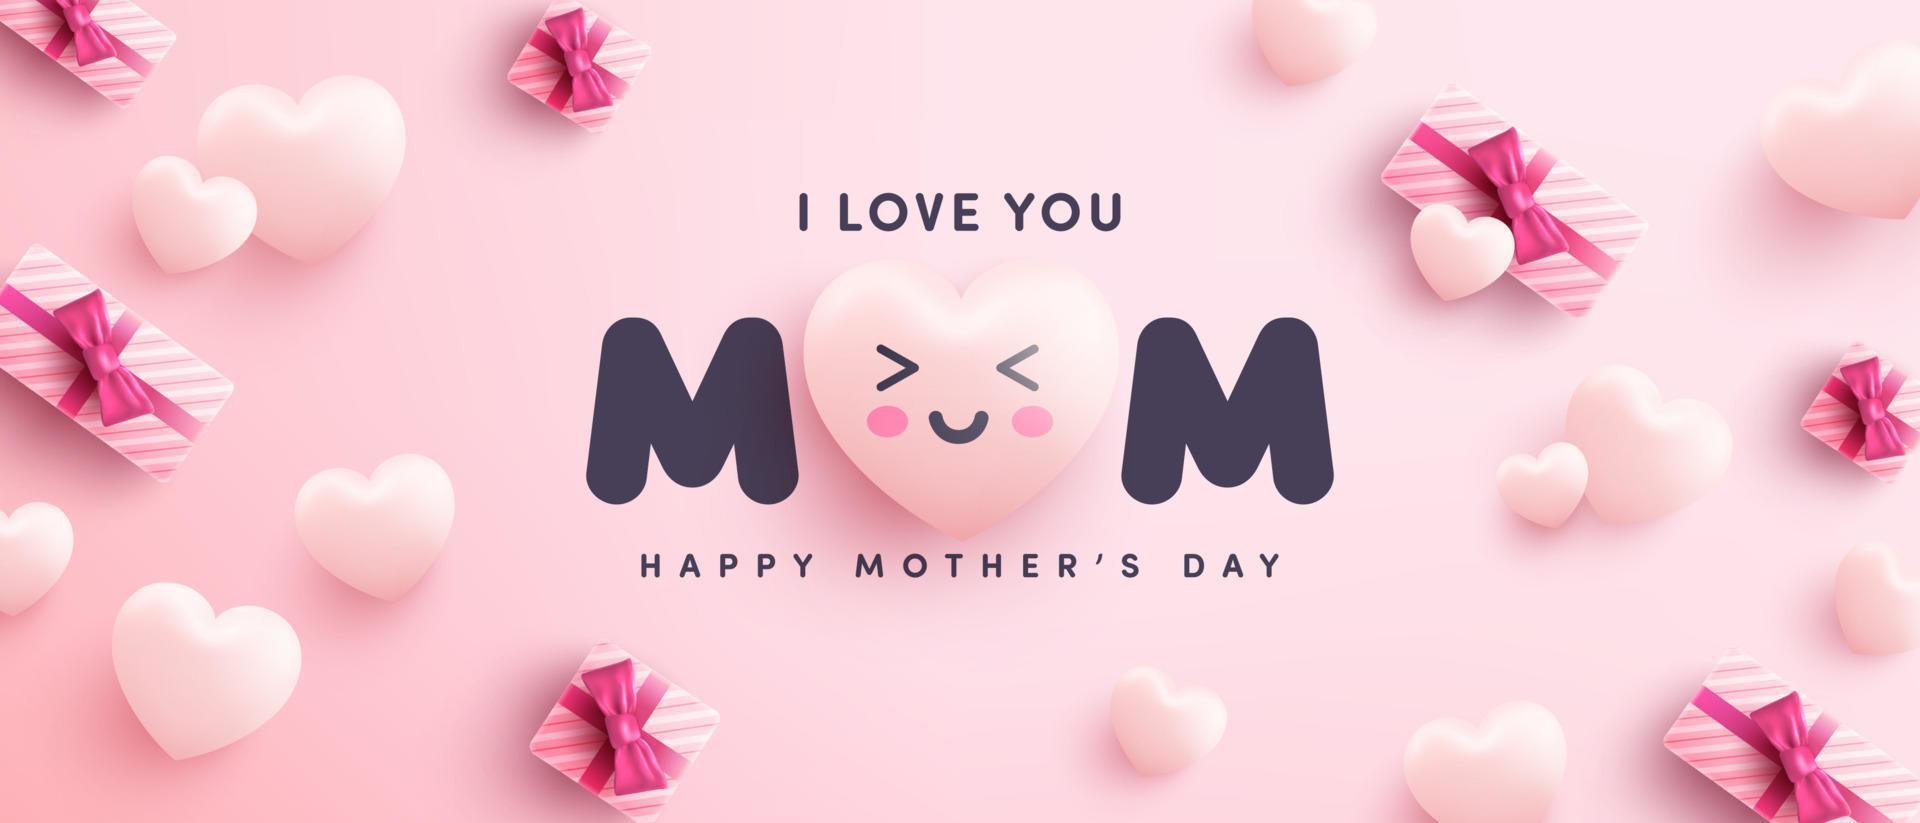 Mother's Day Poster or banner with sweet hearts and gift box on pink background.Promotion and shopping template or background for Love and Mother's day concept.Vector illustration eps 10 vector